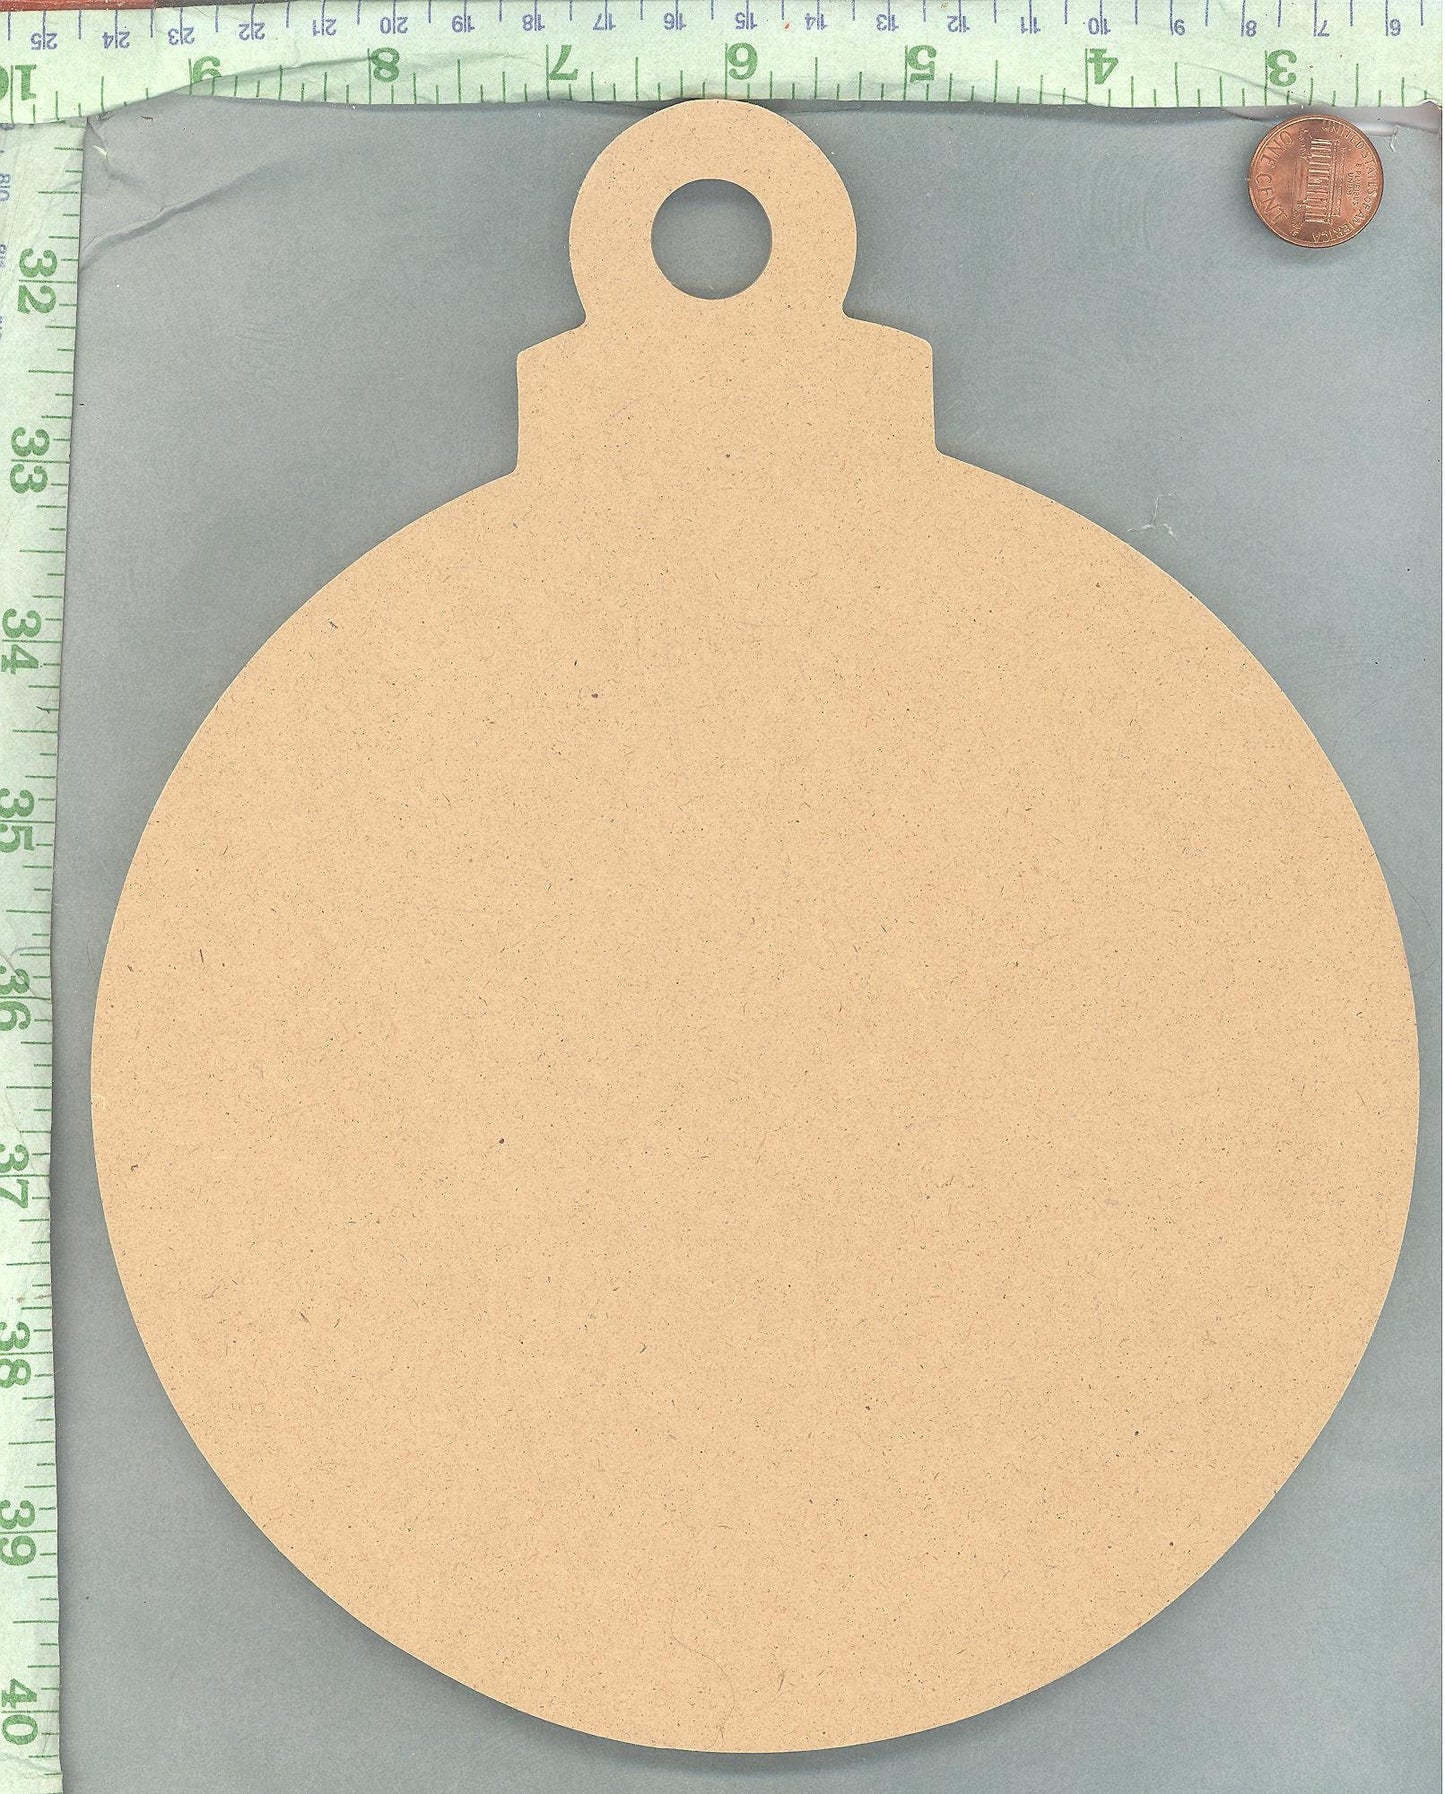 Large Ornament Plaque - Unfinished MDF THIN - 8 inches - DIY Holiday Christmas Decorations